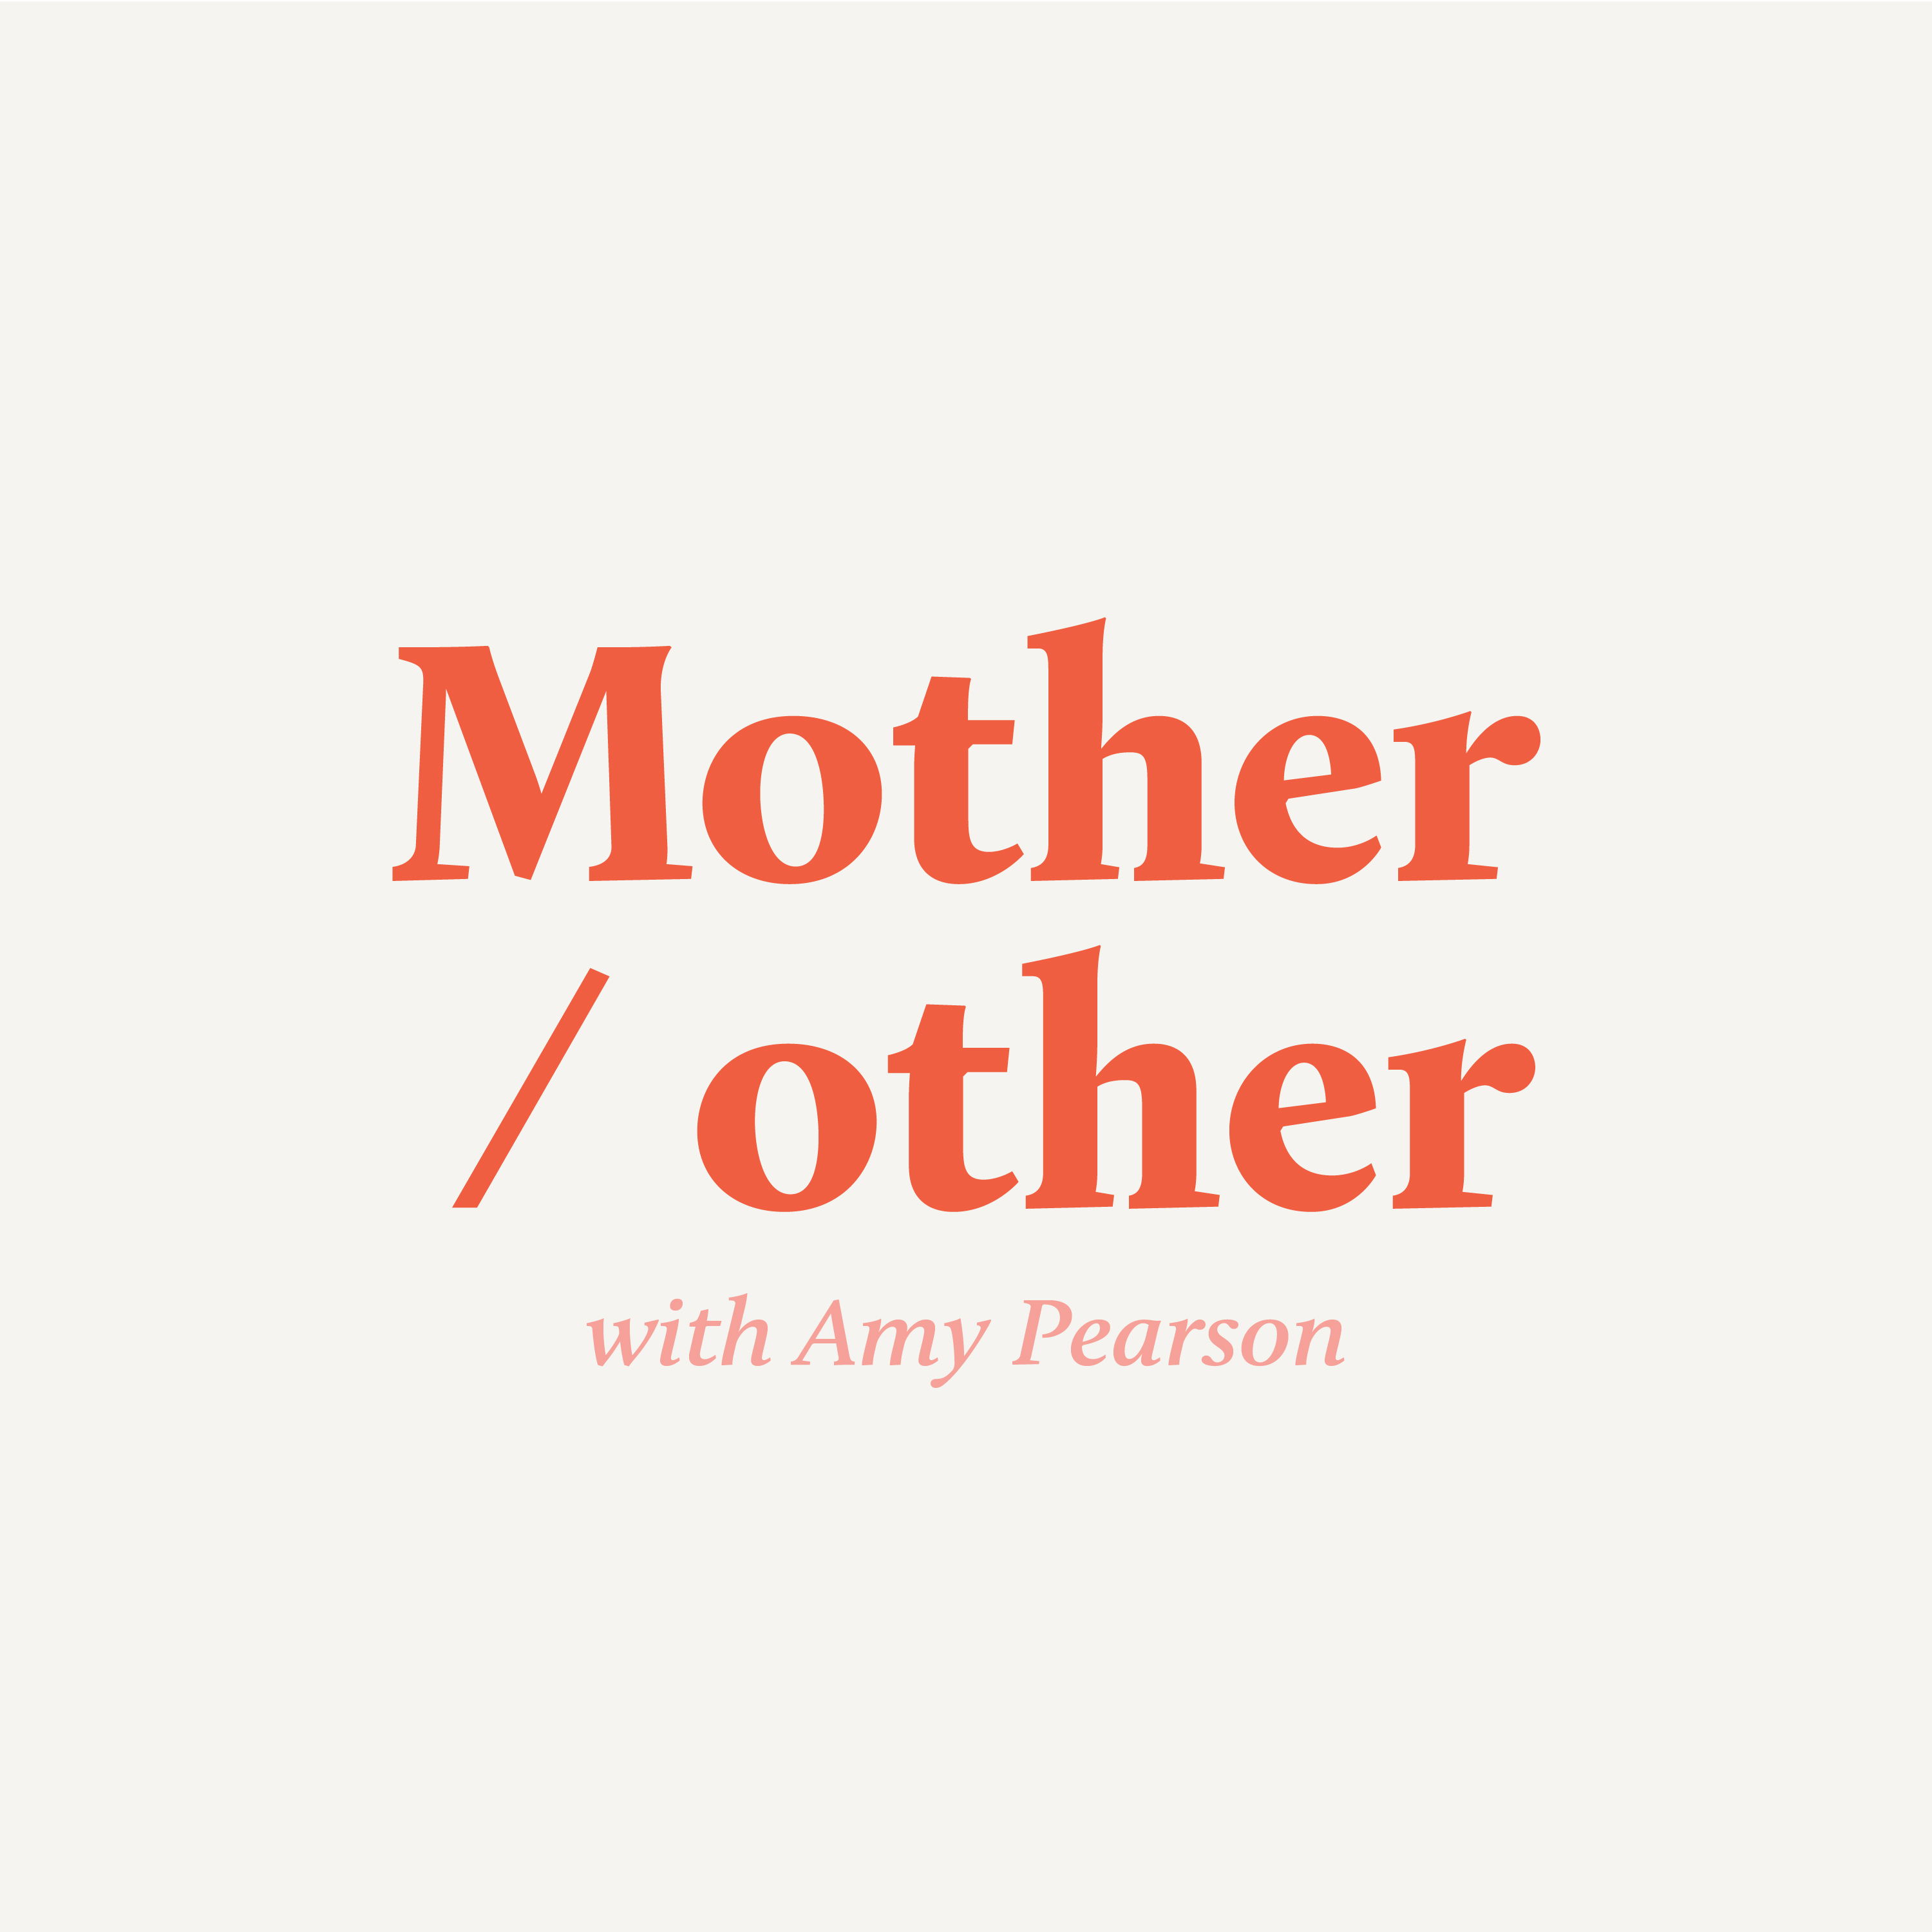 Mother / other